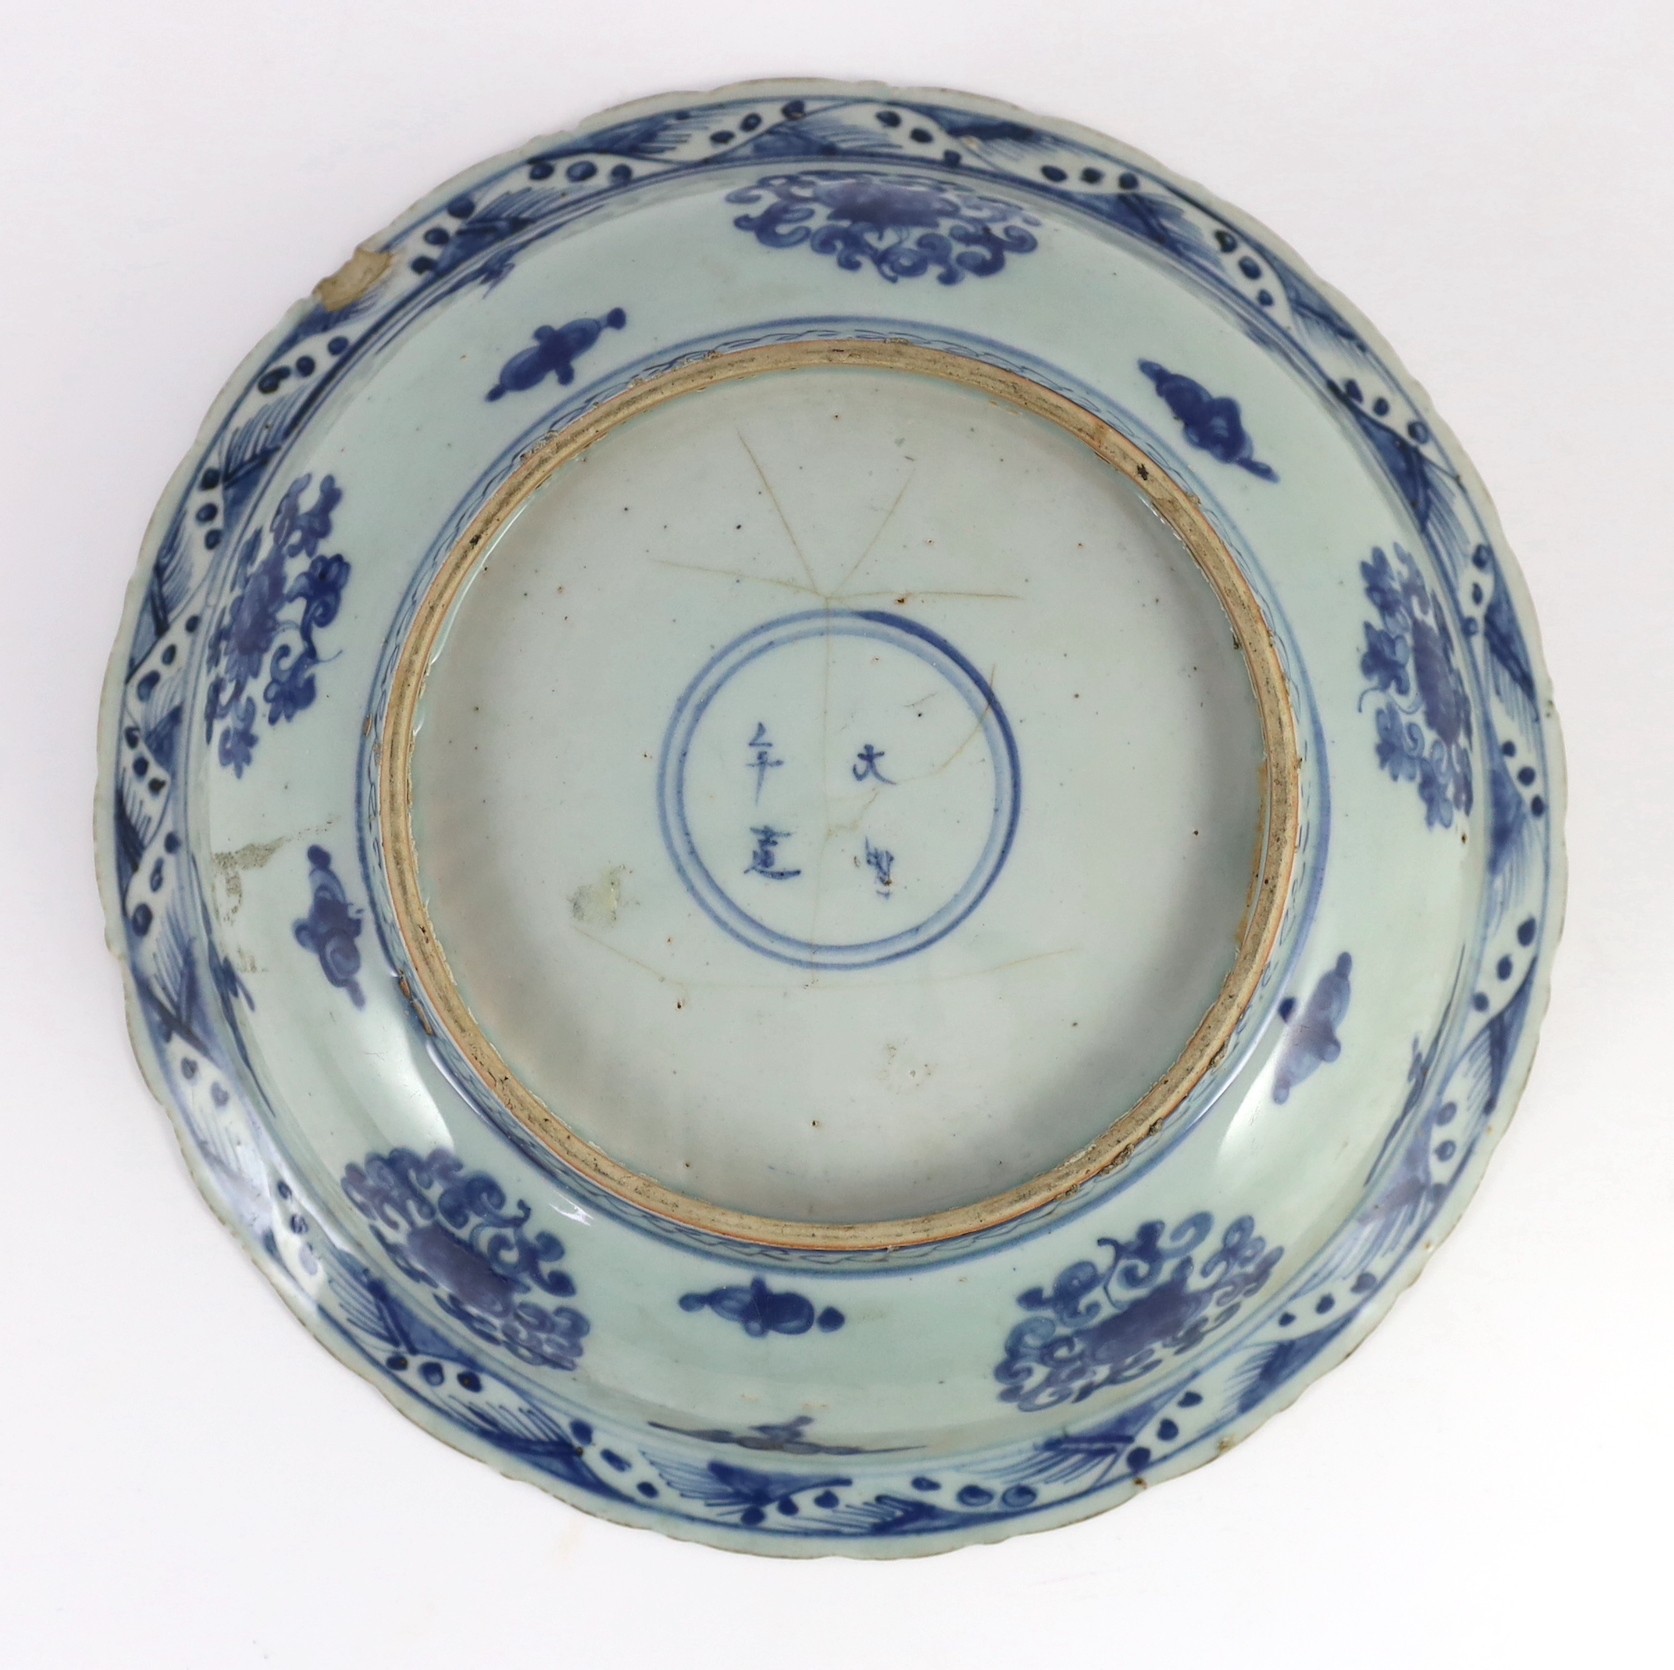 A Chinese Ming blue and white ‘lion’ dish, four character Ming mark, painted with four lions amid - Image 2 of 4